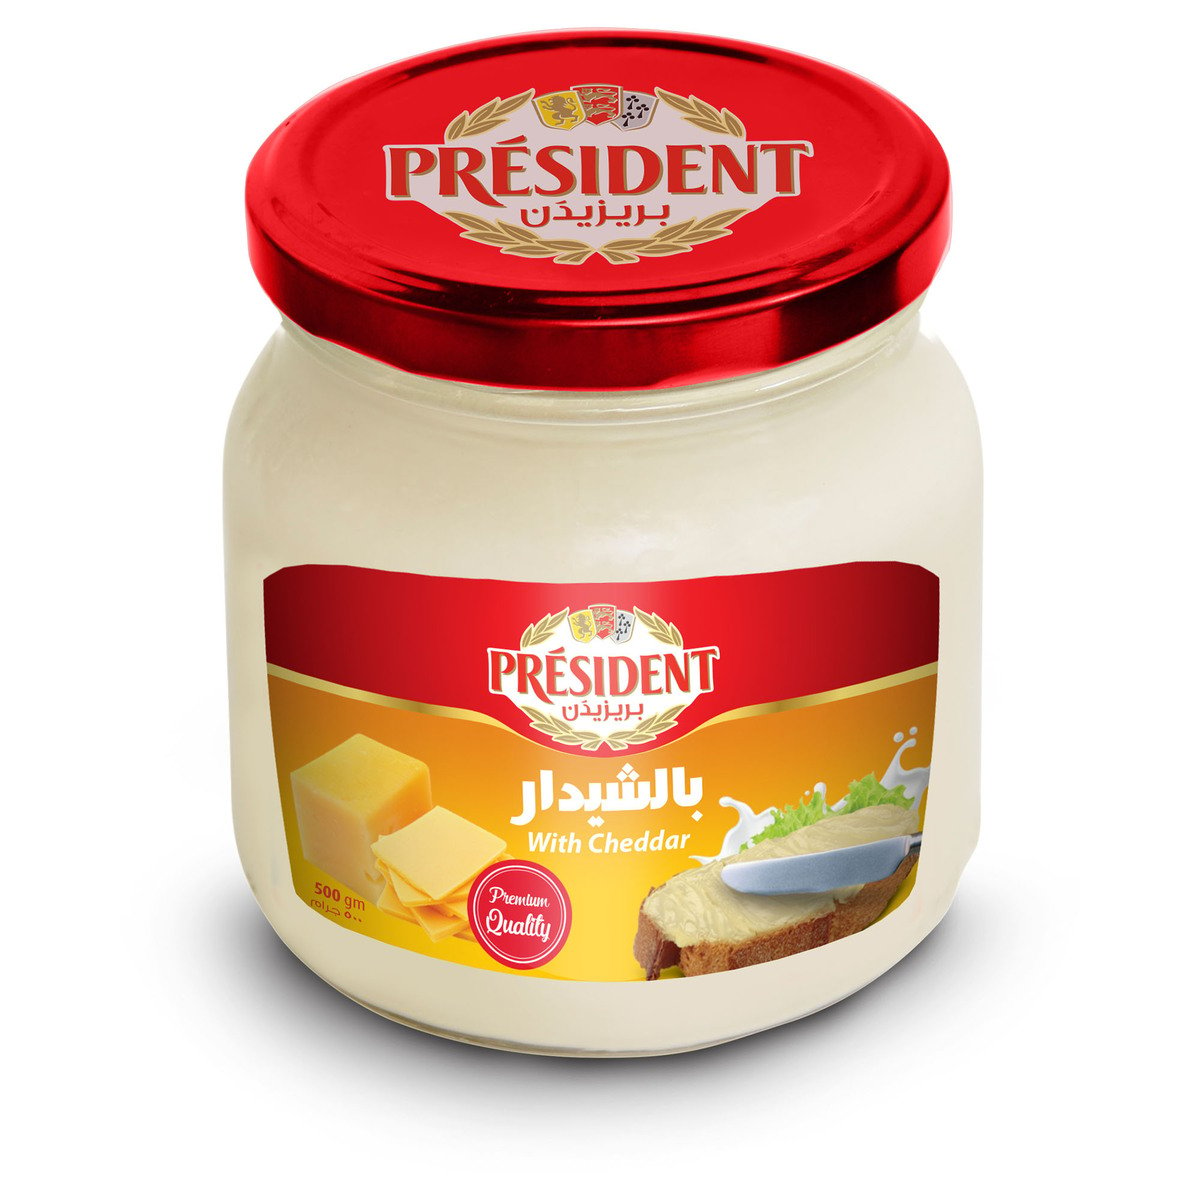 President With Cheddar Cheese 500g